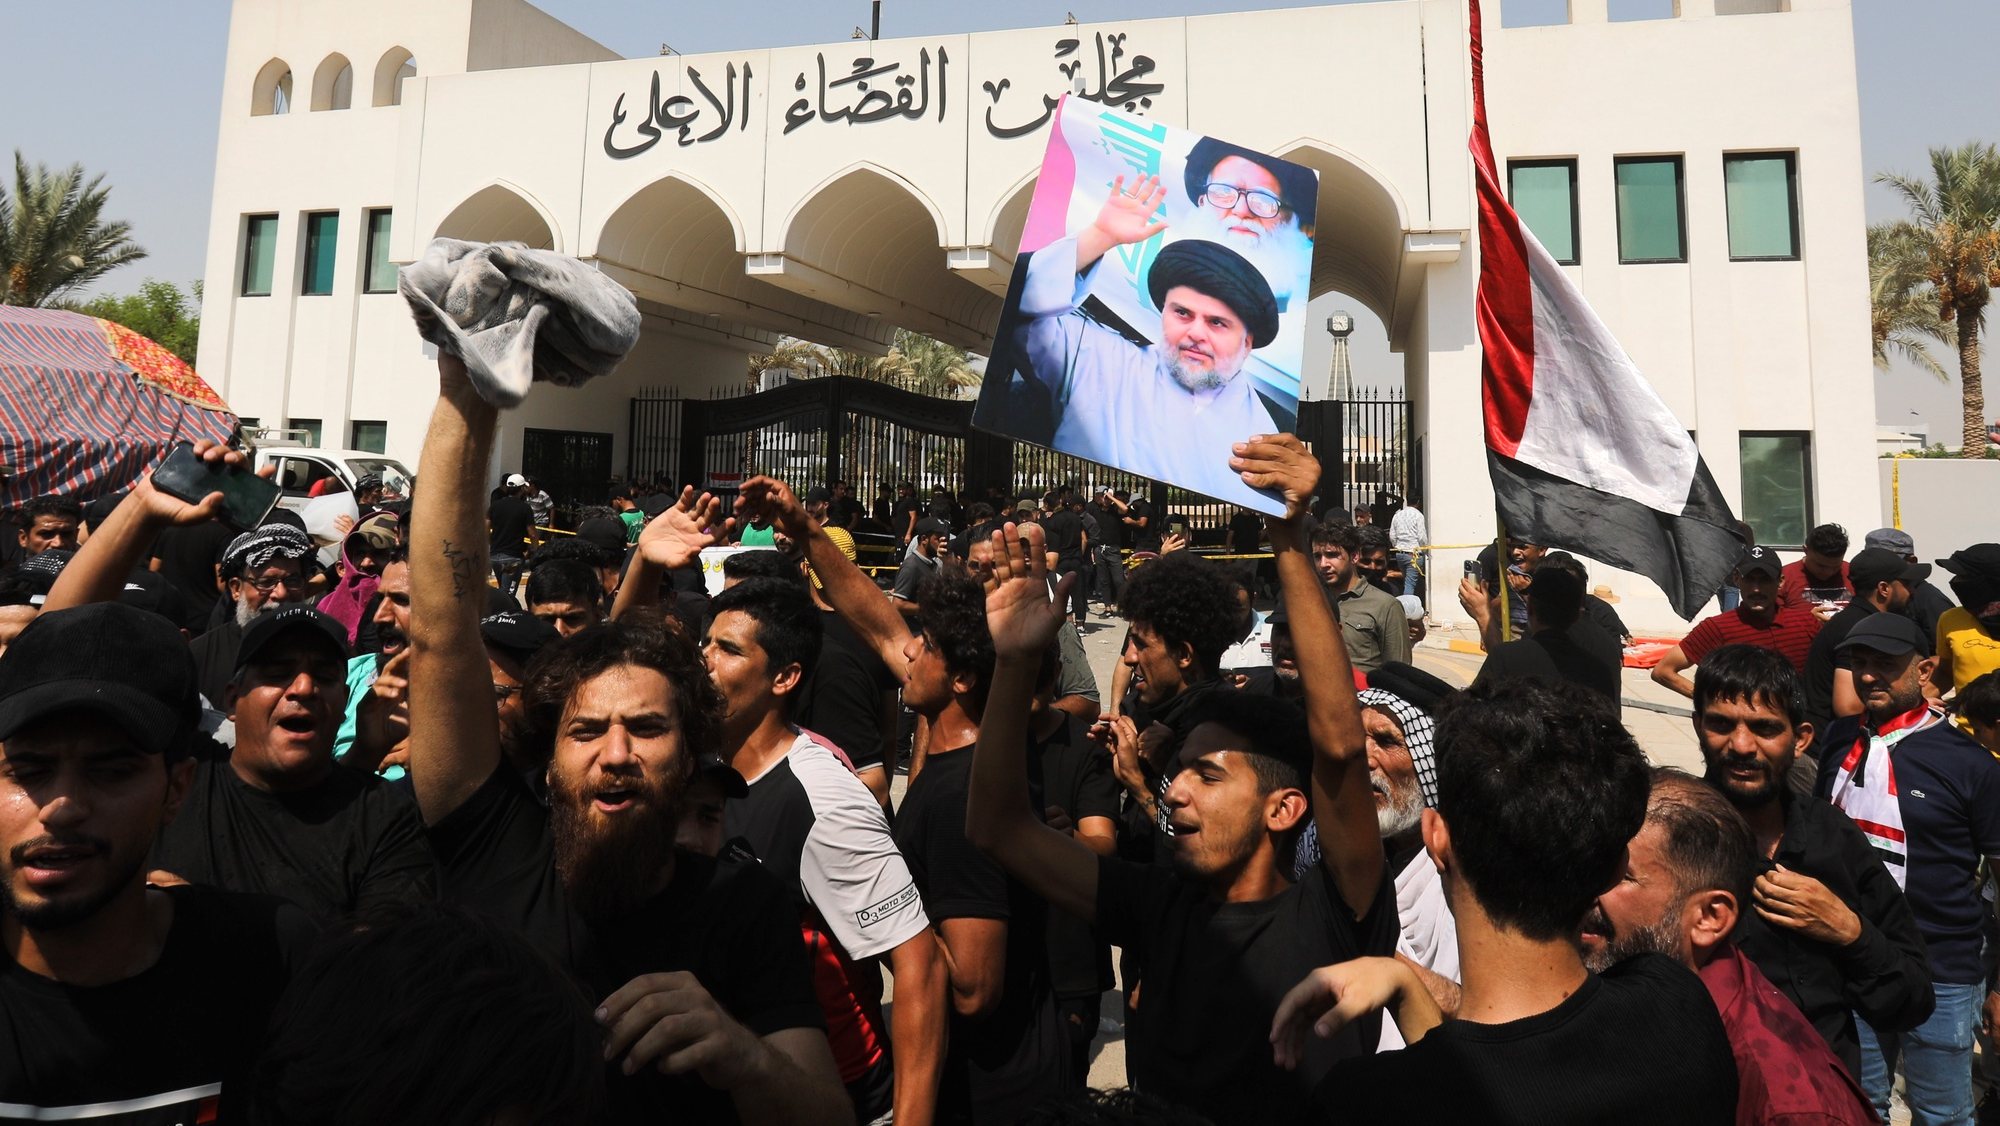 epaselect epa10134469 Supporters of Iraqi Shiite cleric Muqtada al-Sadr, head of the Sadrist movement carry his picture in front of the Supreme Judicial Council, Baghdad, Iraq, 23 August 2022. Supporters of Iraqi Shiite leader Muqtada al-Sadr gathered for a protest and sit-in in front of the Supreme Judicial Council demanding the dissolution of the parliament. They also continue a sit-in at the parliament that began on 30 July, while Supporters of the coordination framework gathered to protest against the rival Sadr&#039;s followers and calling for forming a new government after October legislative elections.  EPA/AHMED JALIL